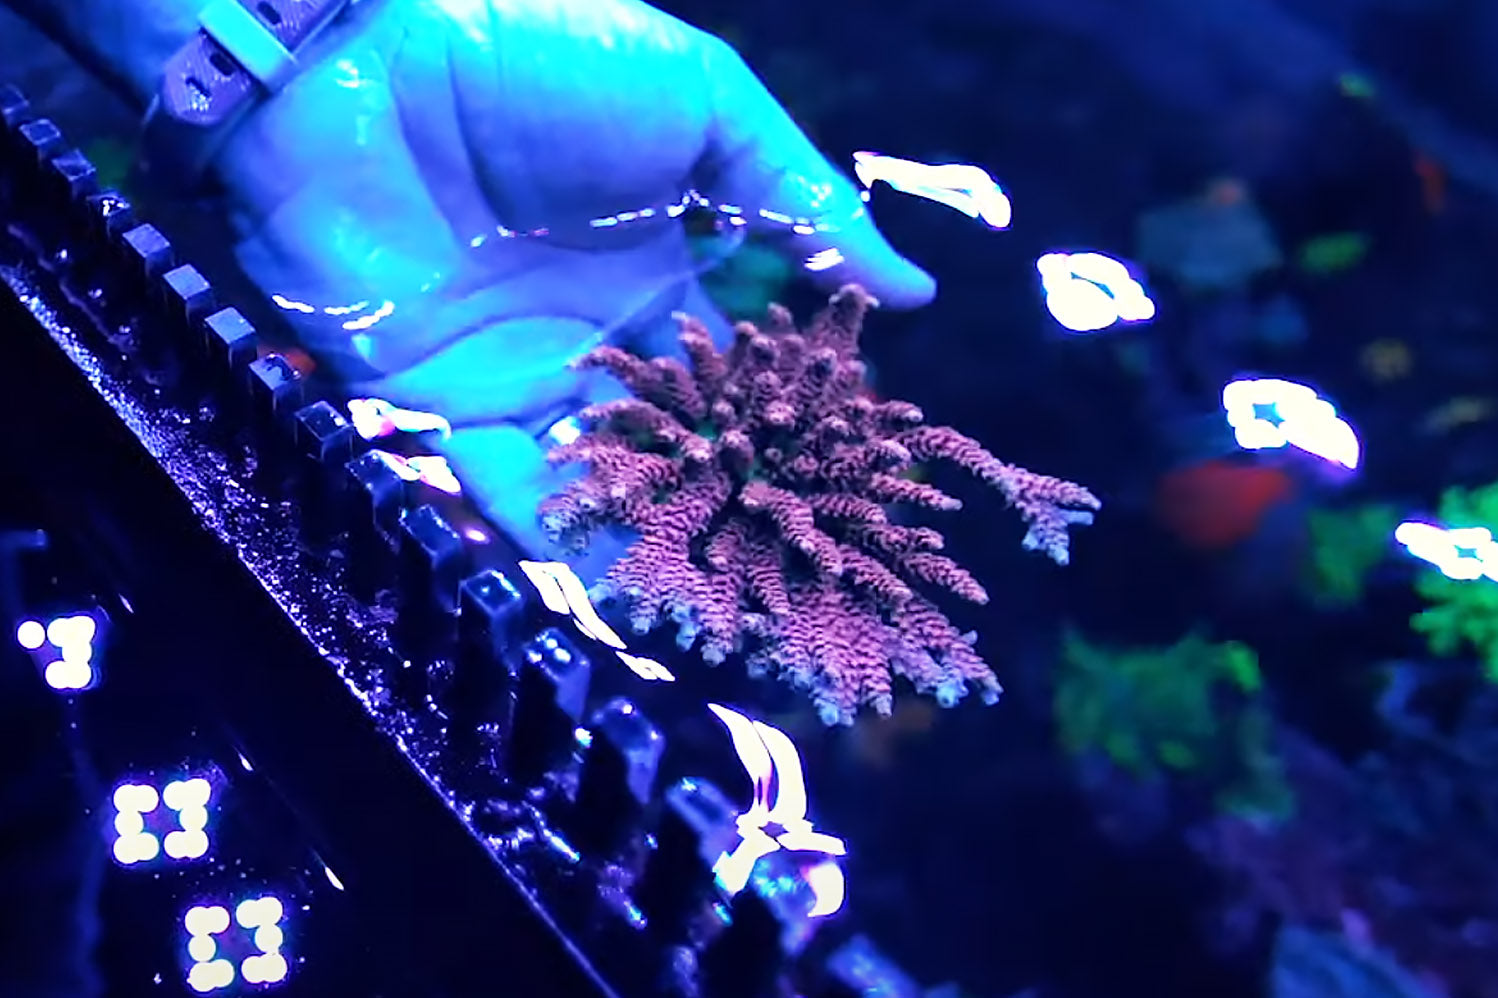 Coral Handling Safety Tips for Aquarium Owners